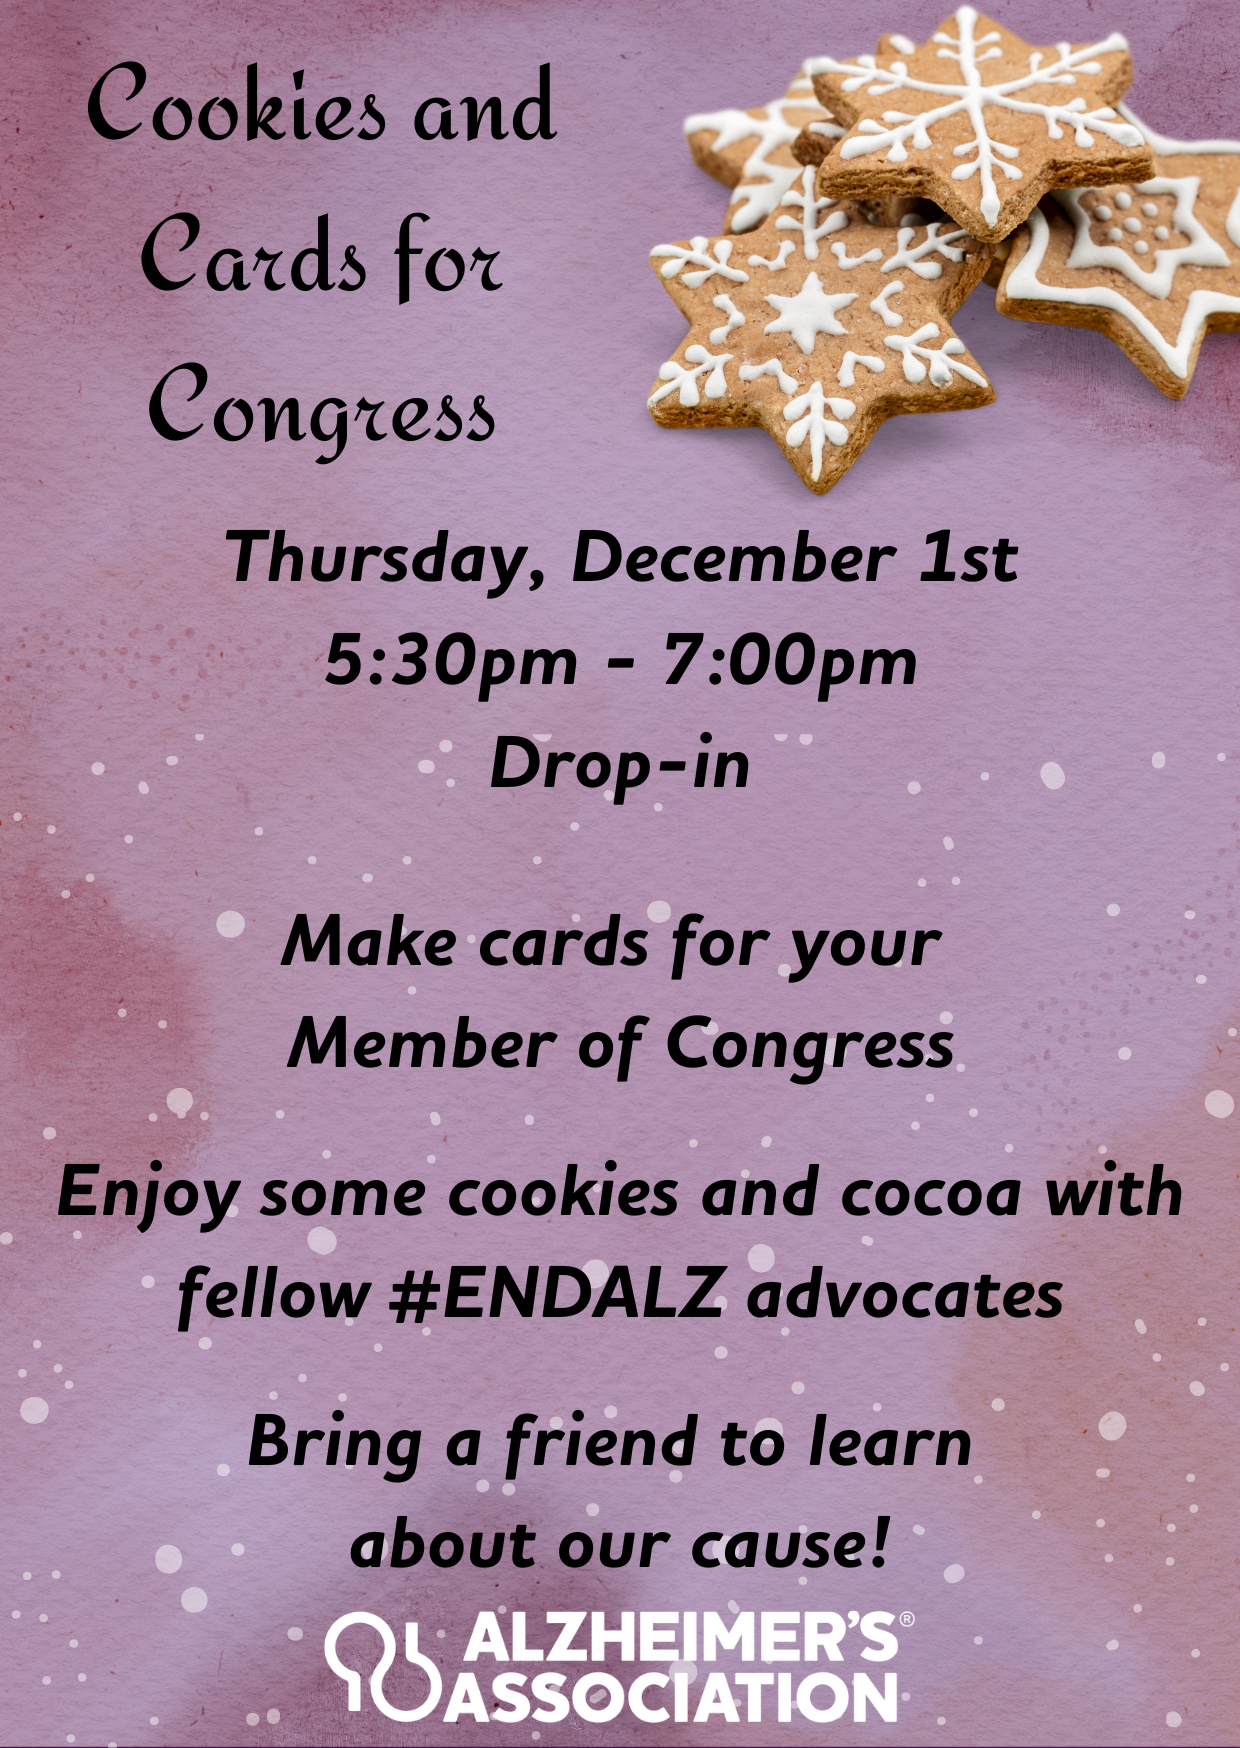 Cookies and Cards for Congress